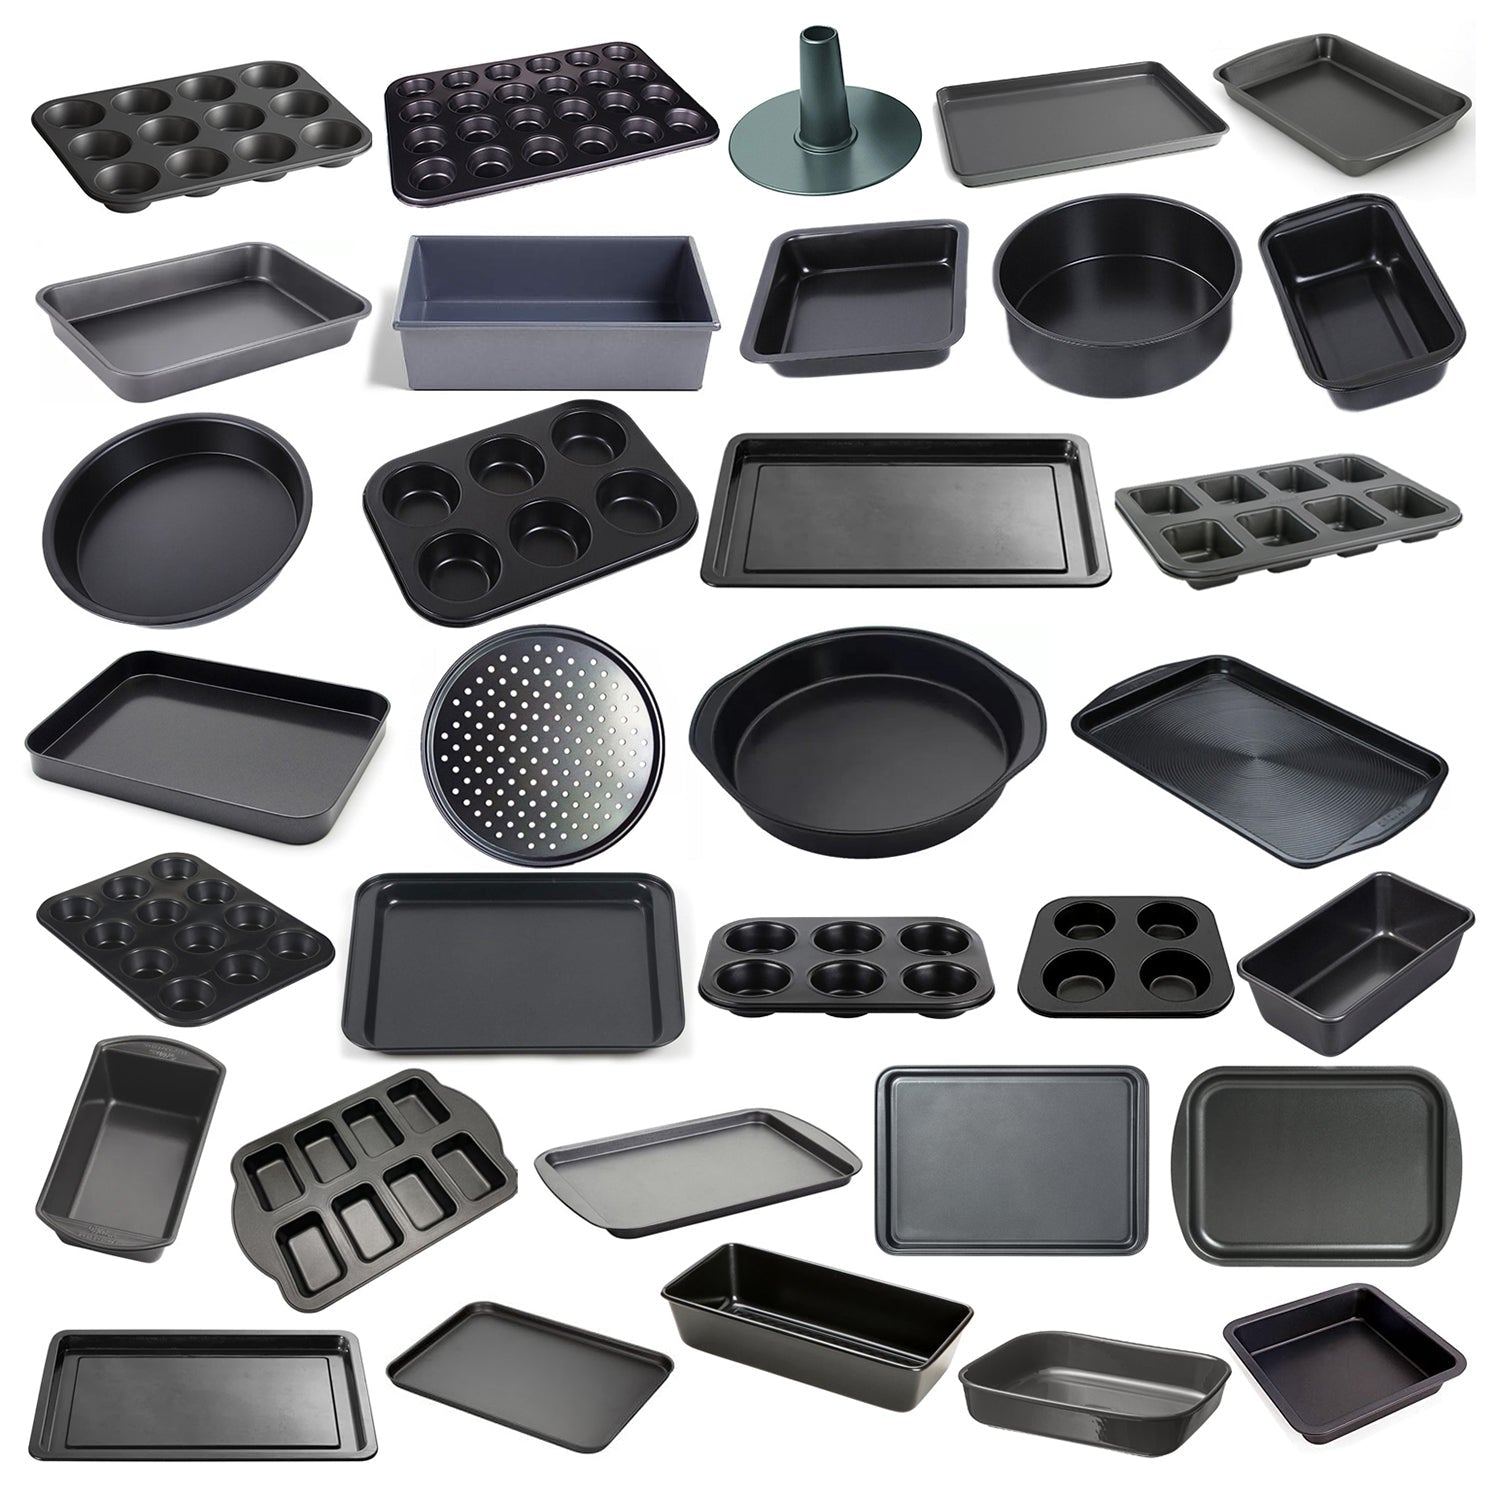 7055 Non-Stick and Microwave Safe Bakeware Set (Pack of 50Pcs)